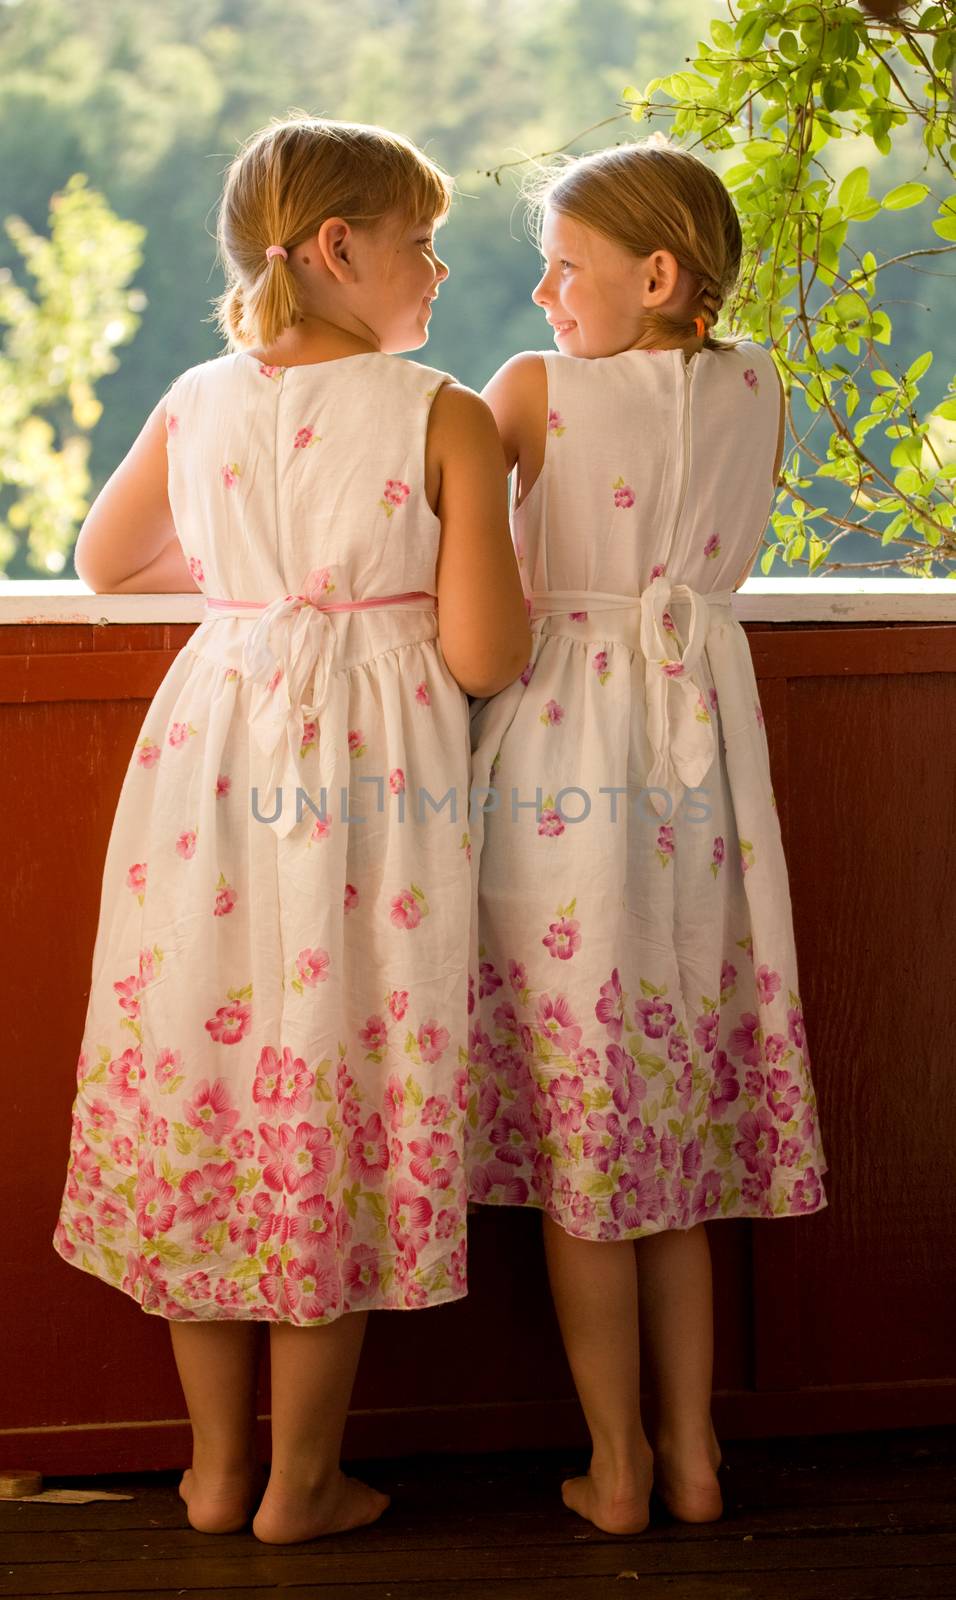 Twin girls in summer dresses by kavring